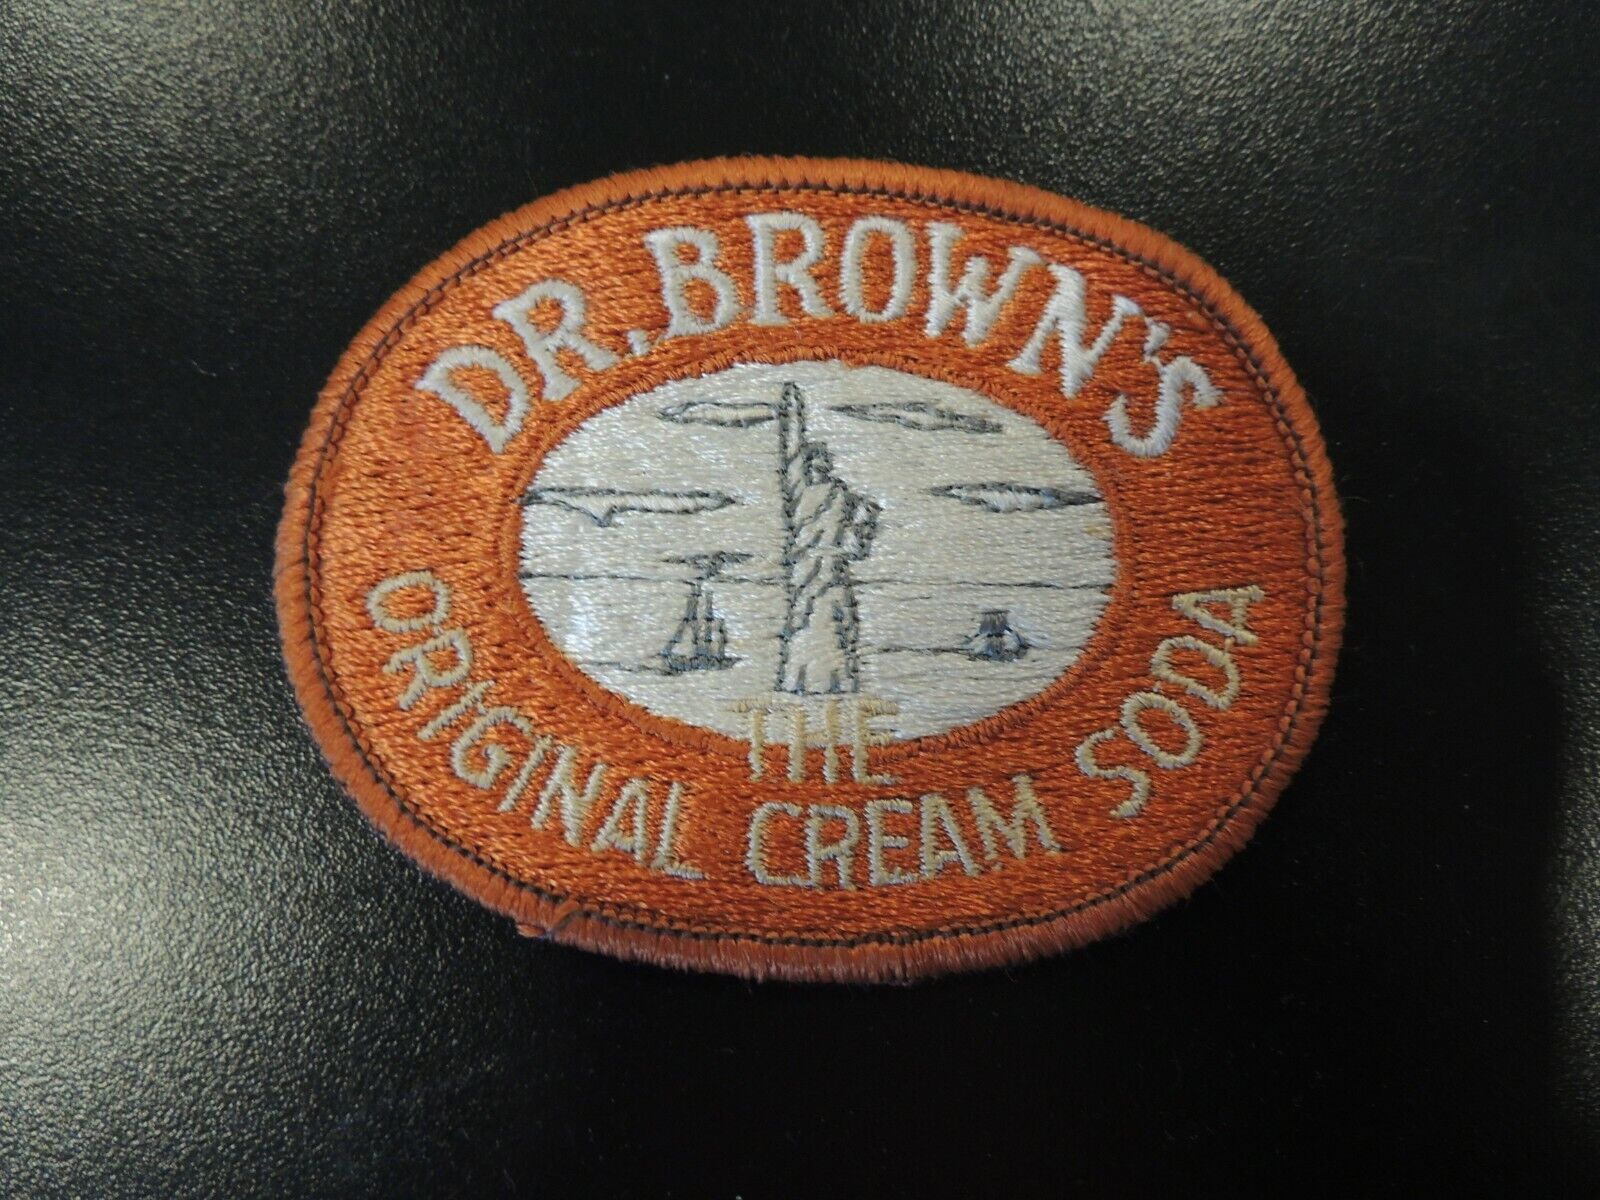 Vintage Dr. Brown's The Original Cream Soda Cloth Advertising Patch